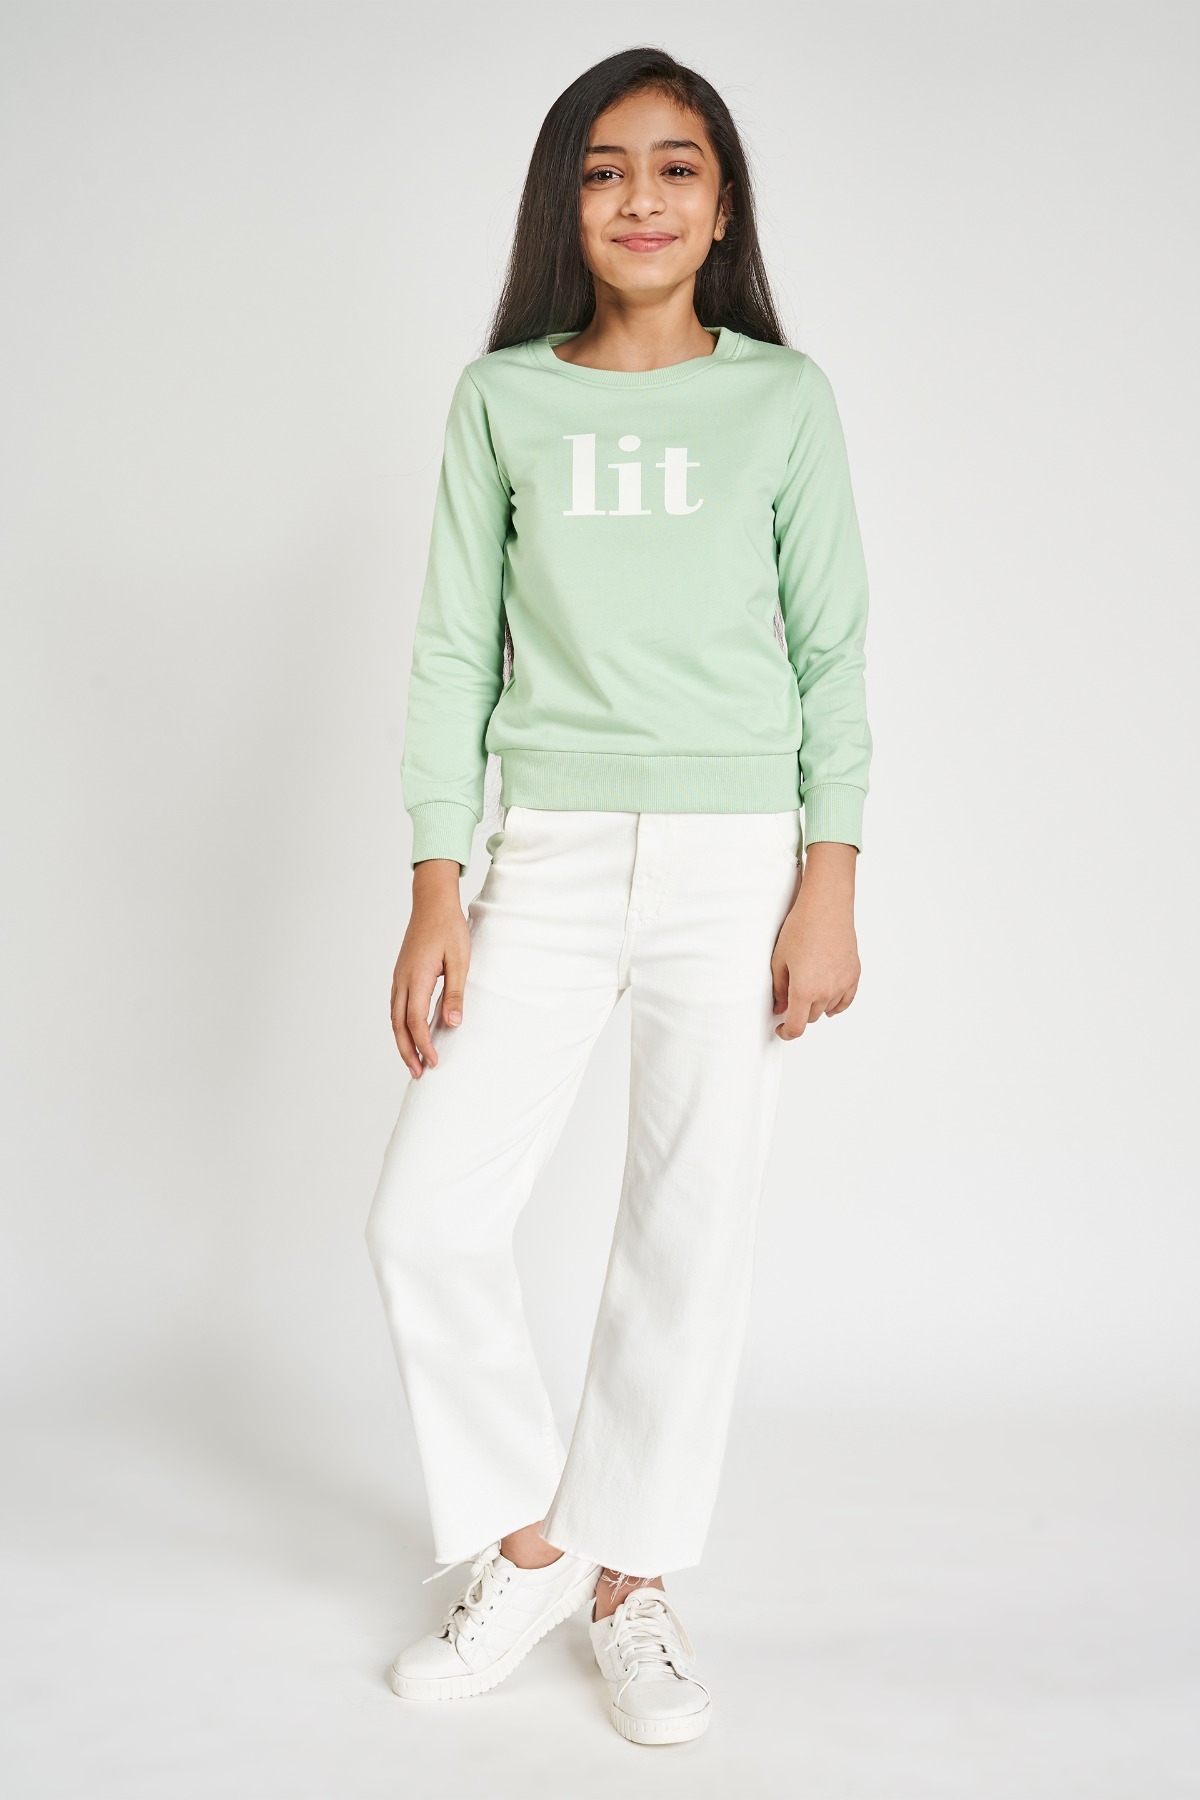 AND | Light Green Top